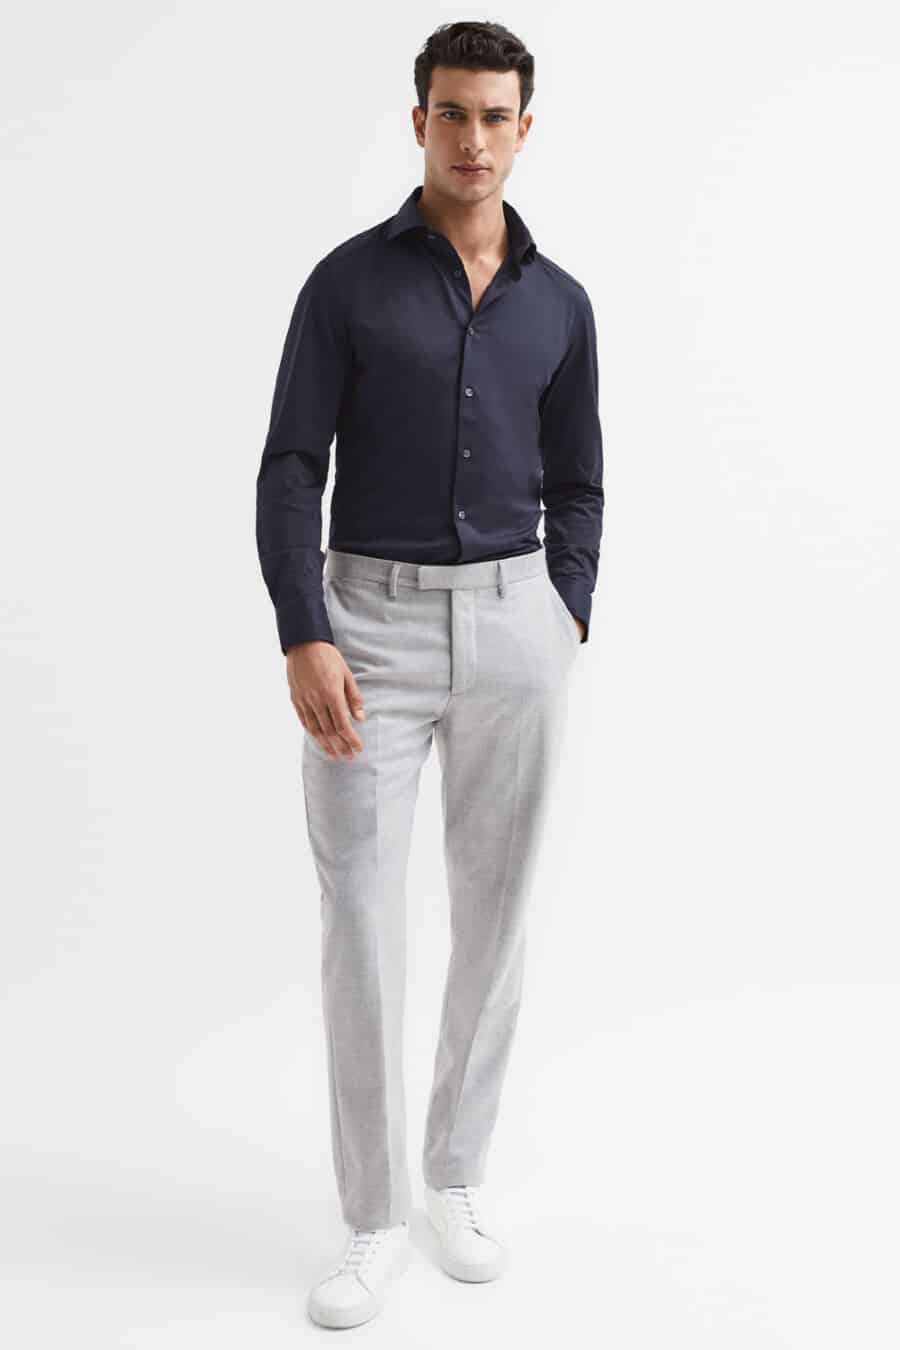 What color shirt matches with grey formal pants? - Quora